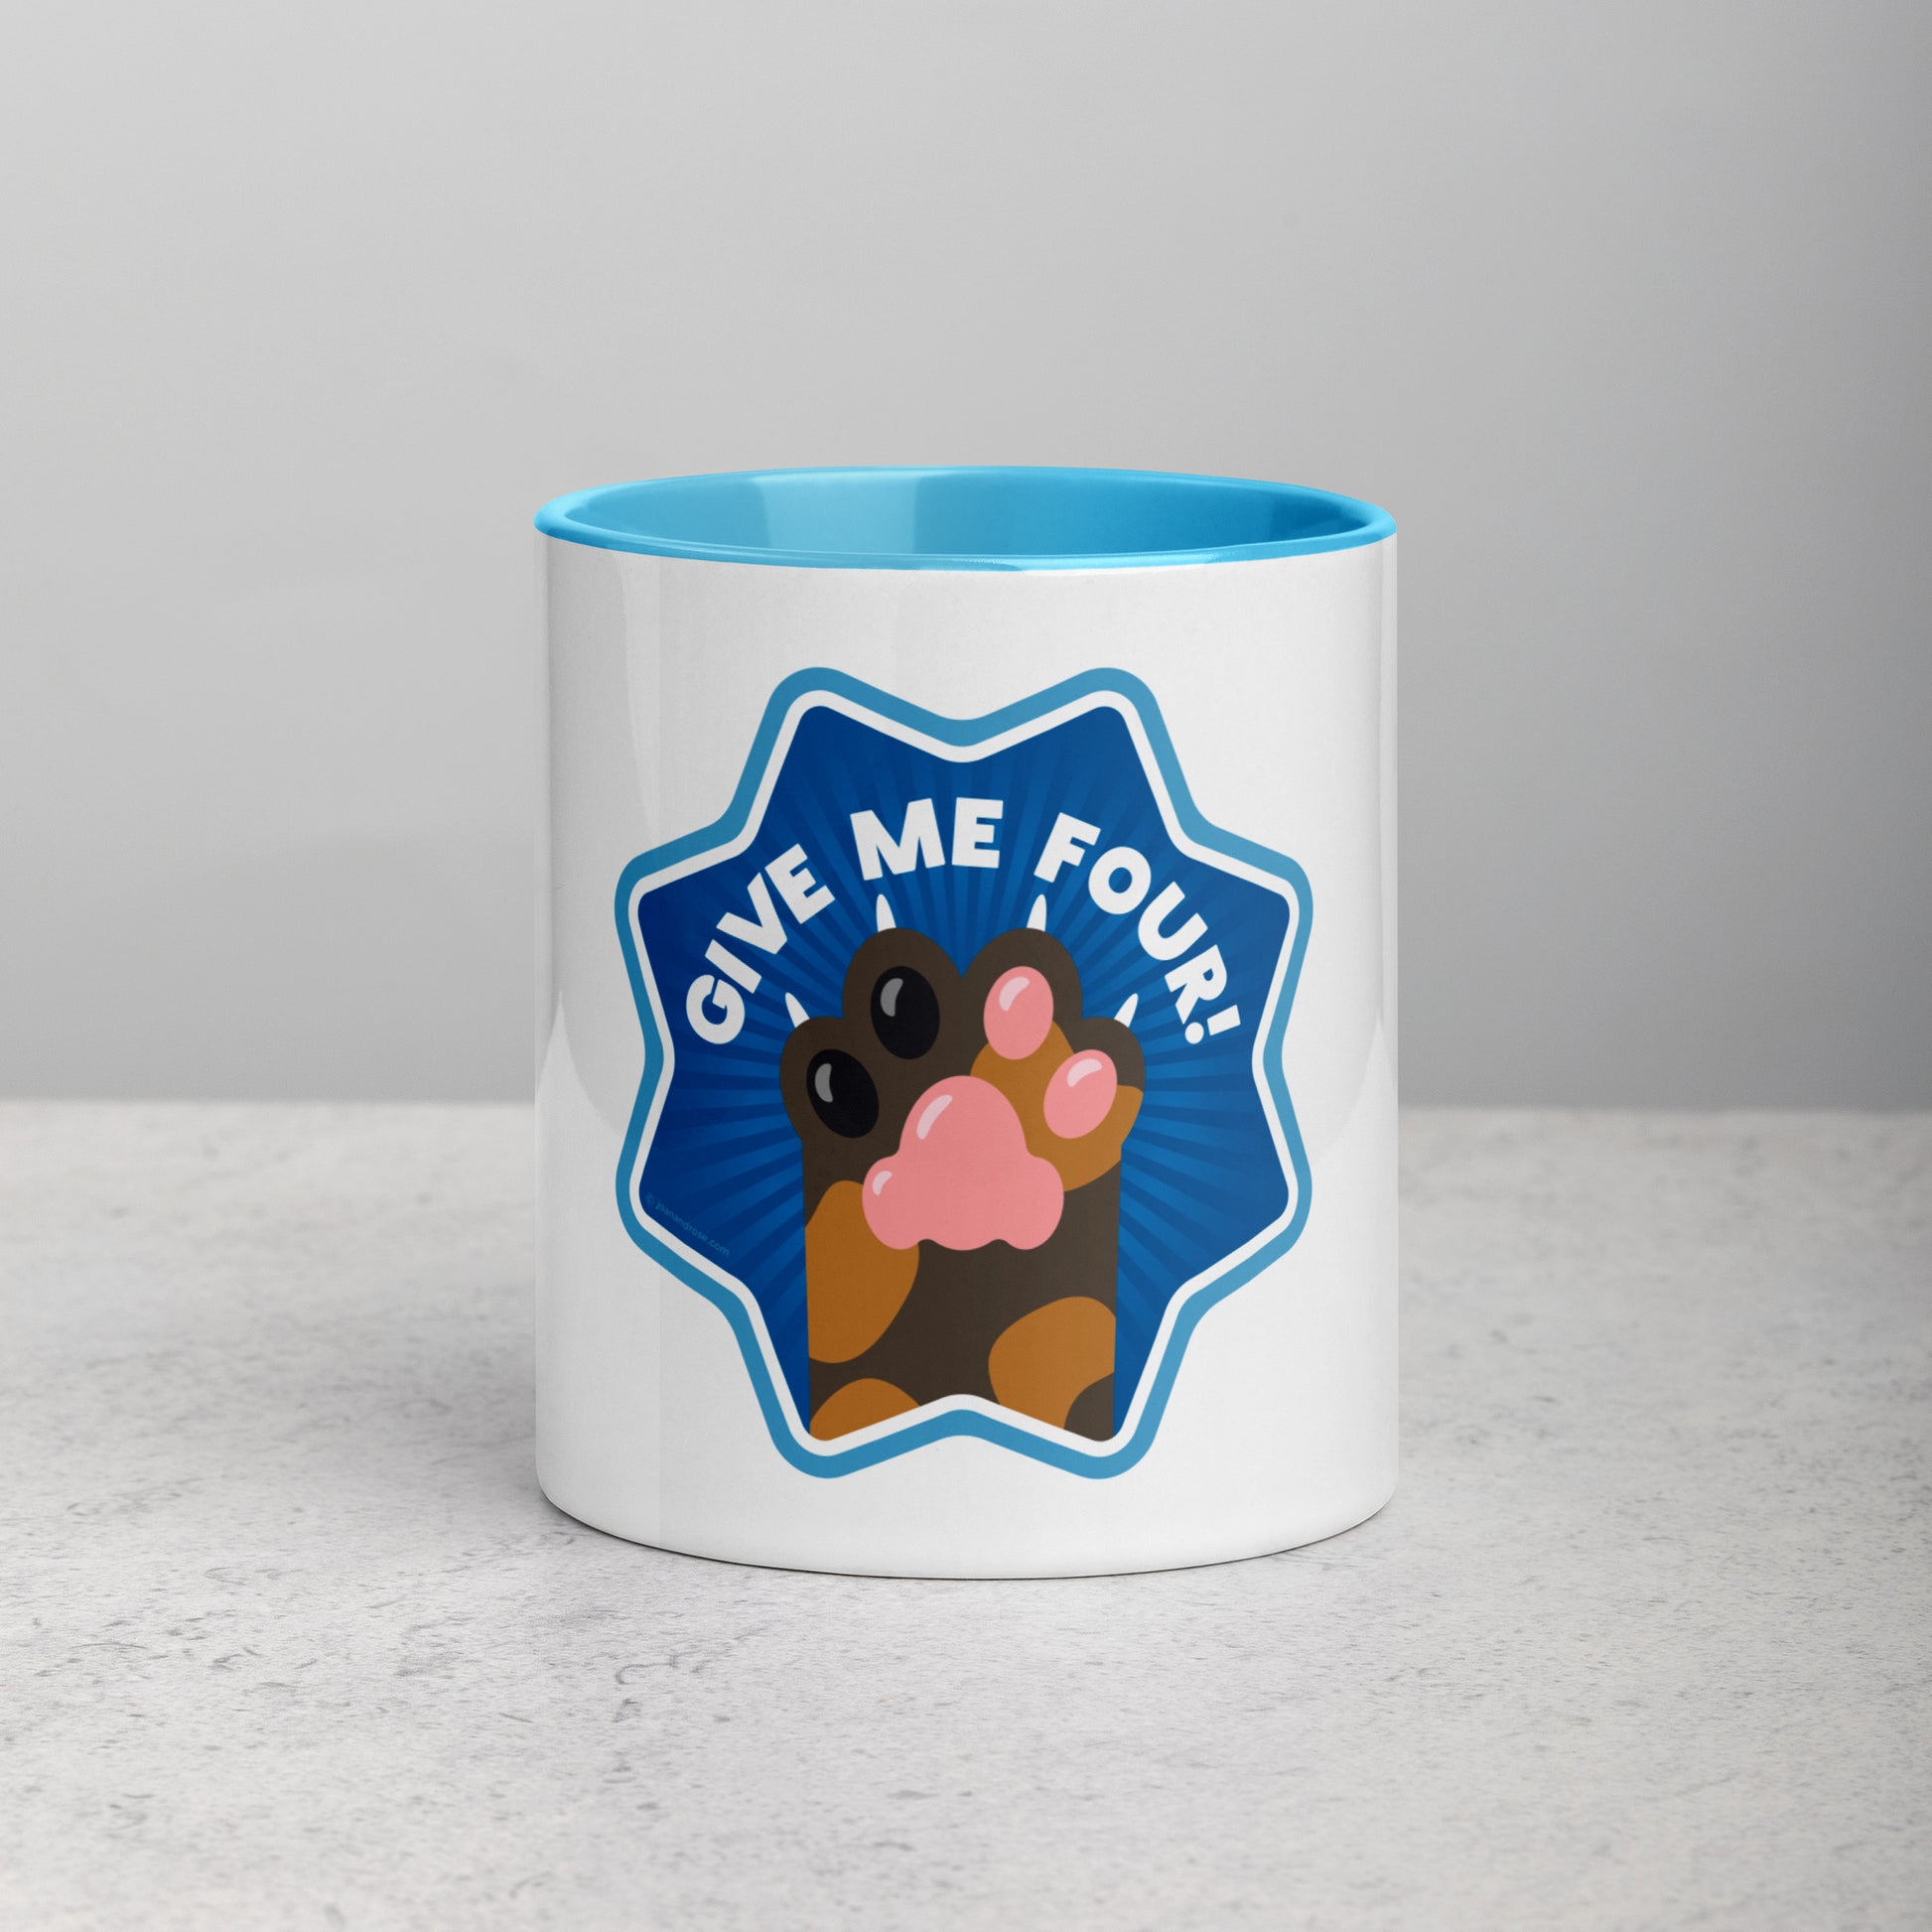 front facing image of a white mug with blue interior and handle. Mug has image of a tortoiseshell cats paw on a blue 8 sided star with the text 'give me four' 